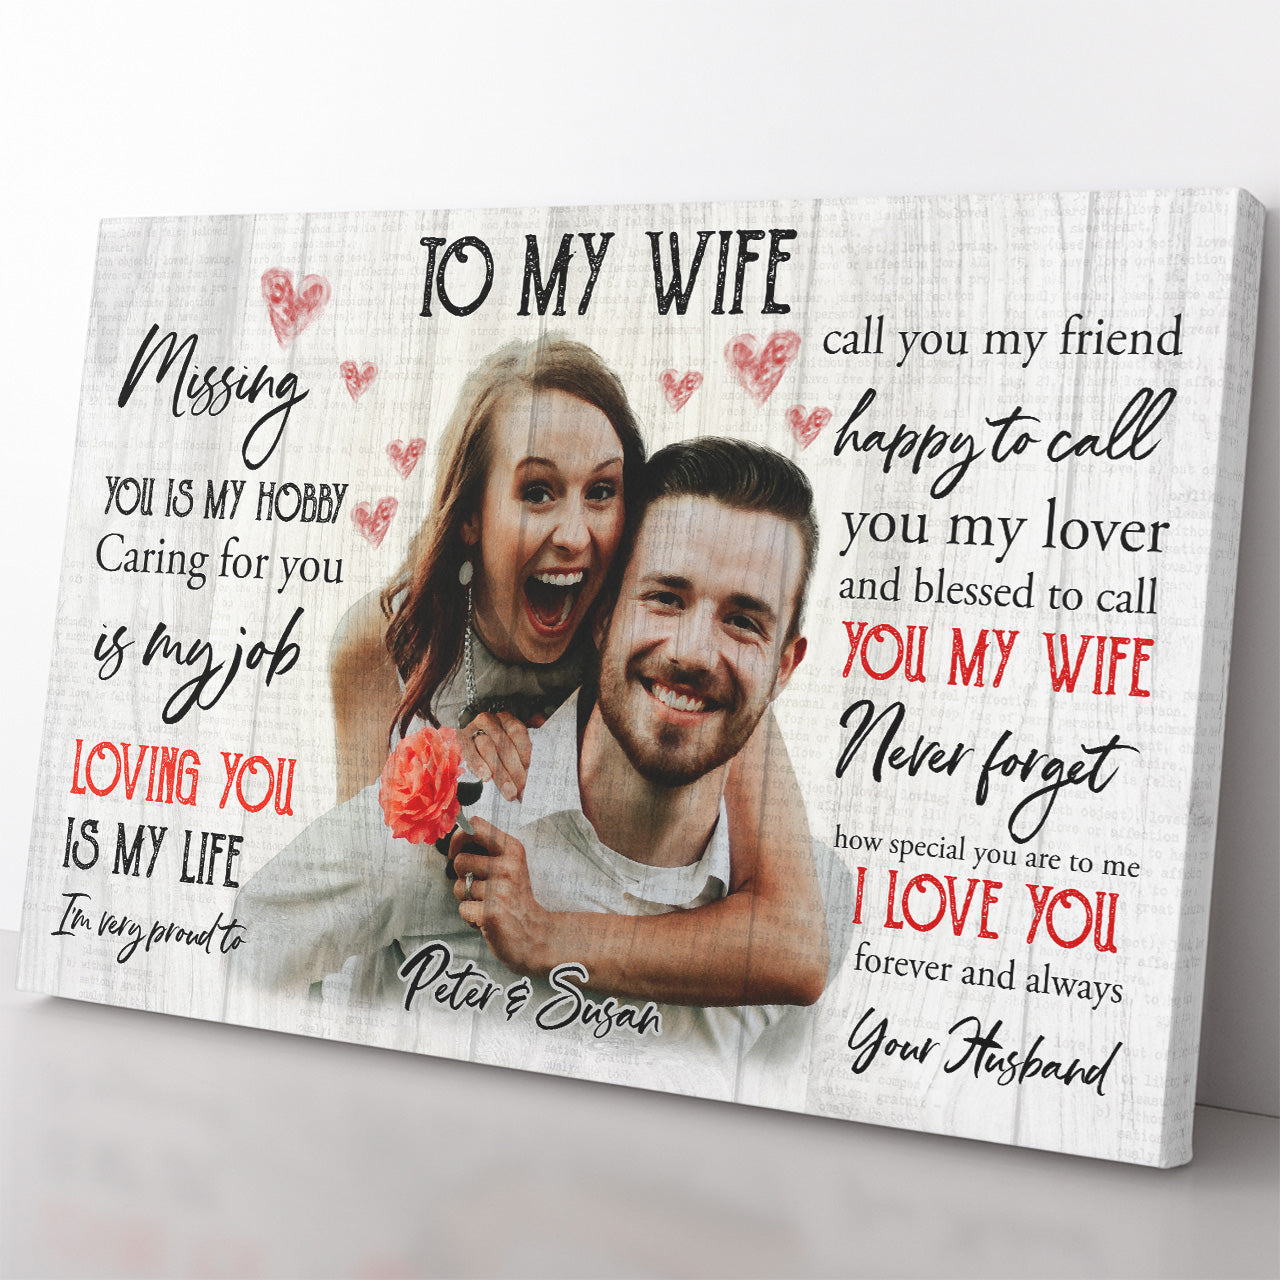 Personalized Canvas Gift Ideas to My Wife, Loving You is My Life 20121804